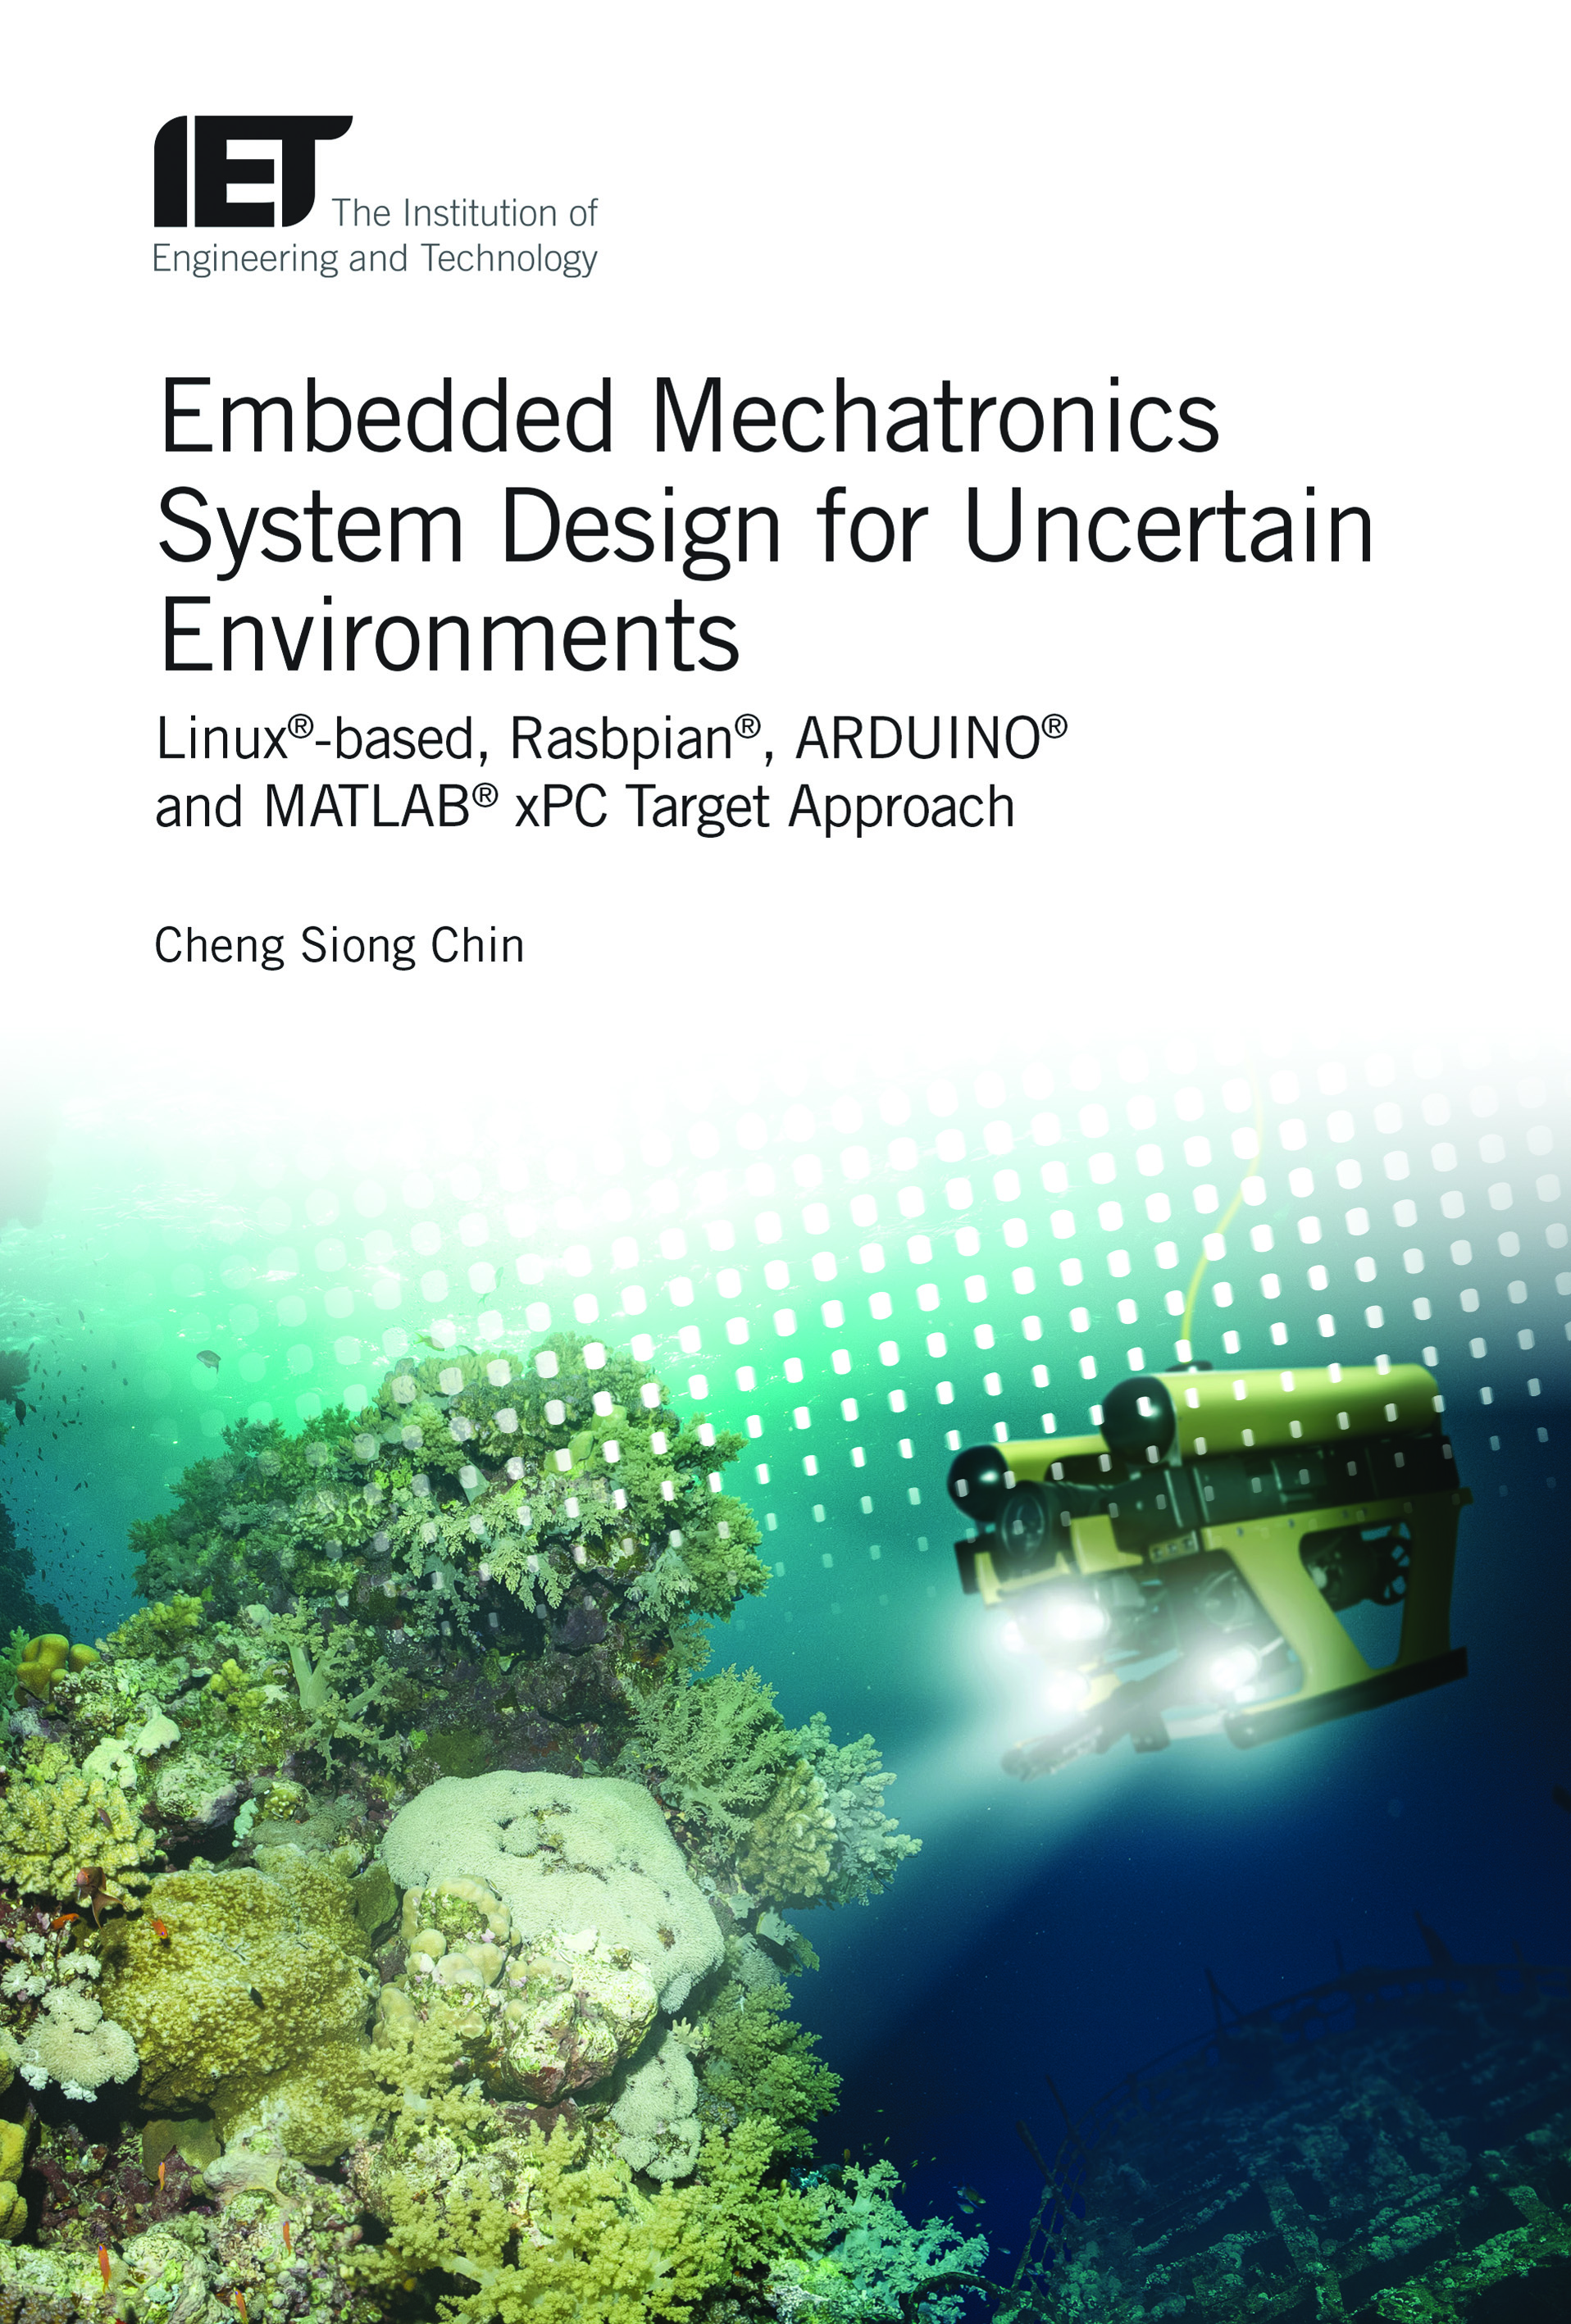 Embedded Mechatronics System Design for Uncertain Environments, Linux®-based, Rasbpian®, ARDUINO® and MATLAB® xPC Target Approaches